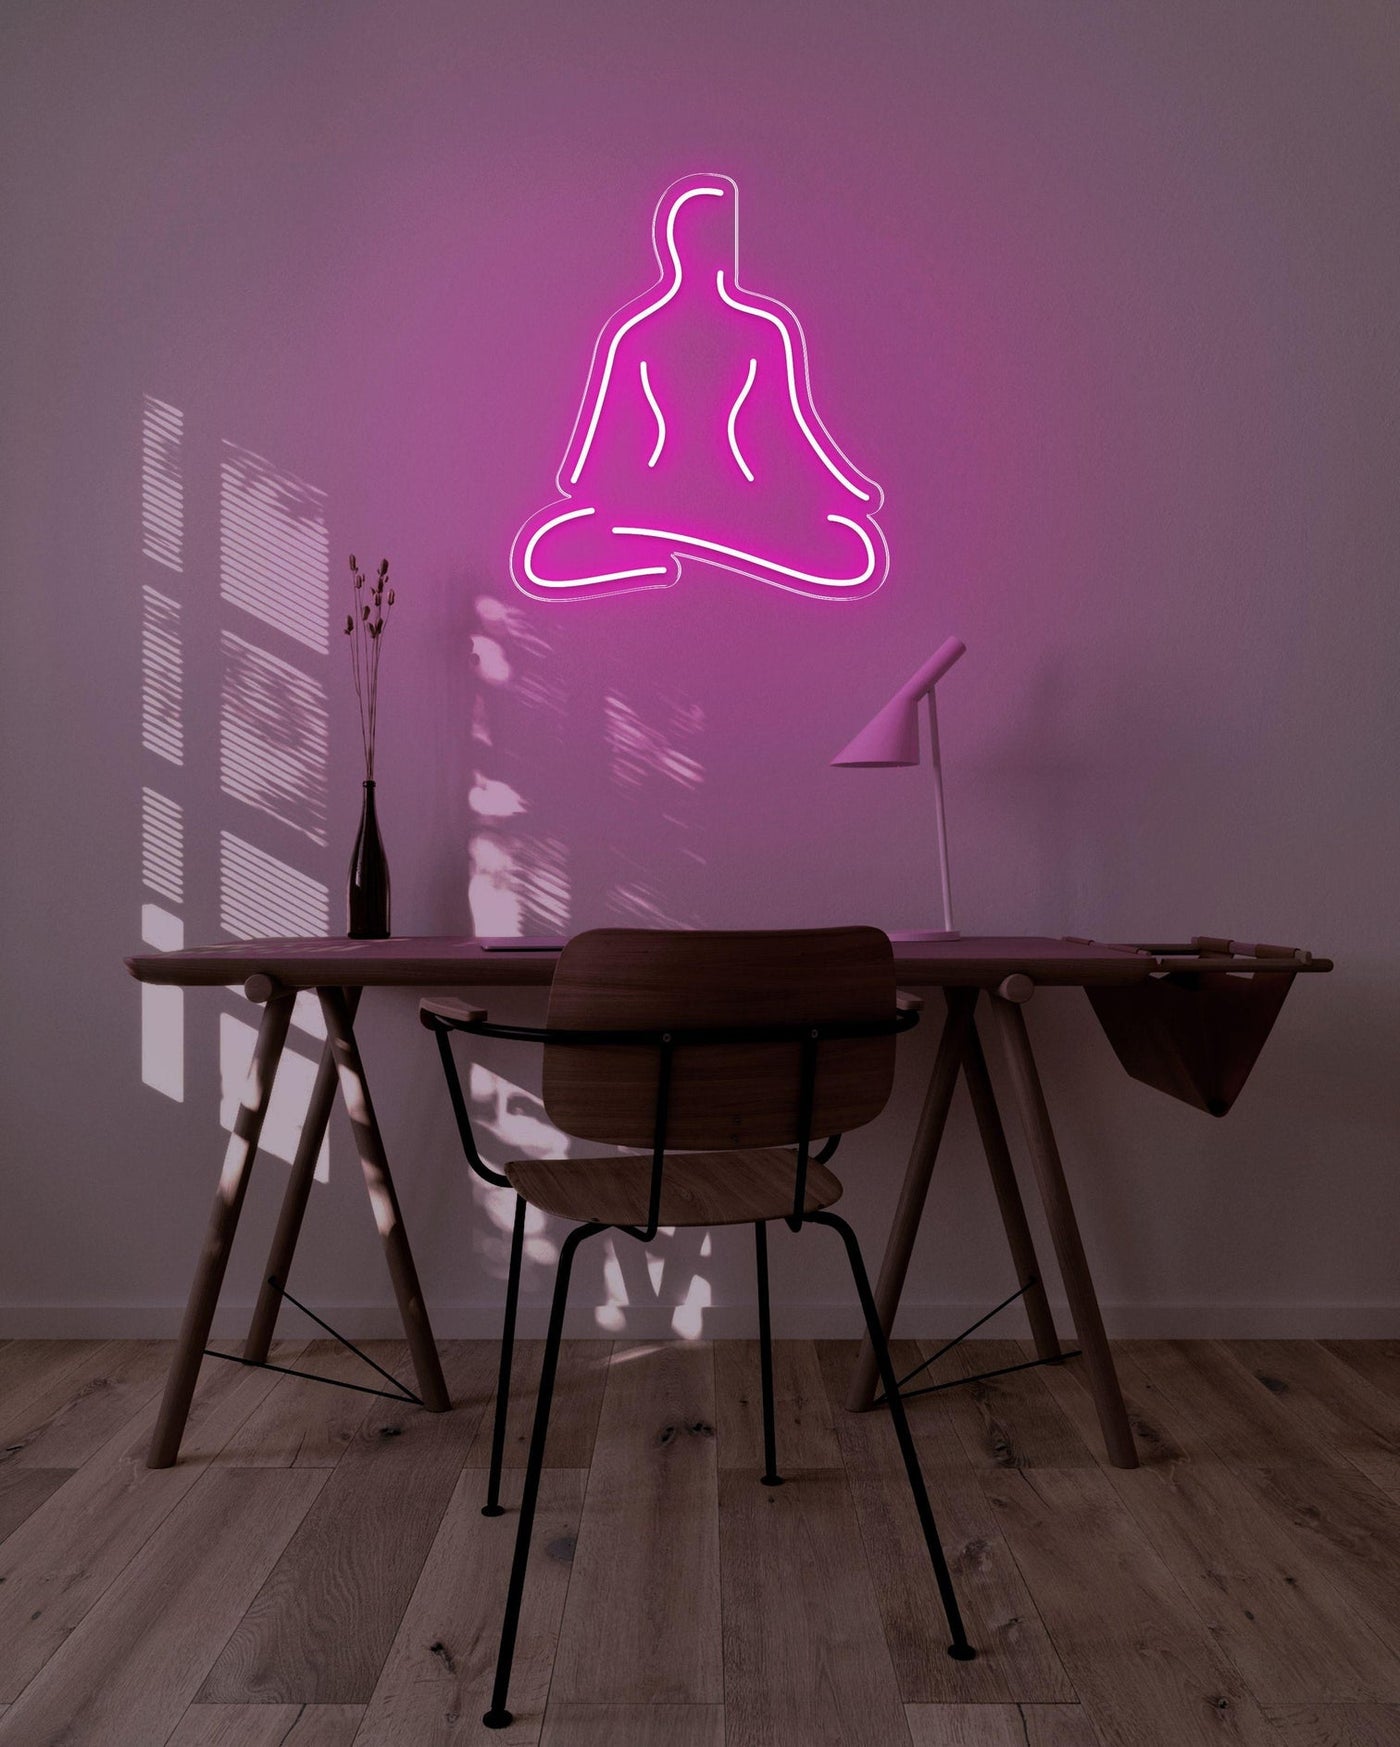 Meditate LED neon sign - 26inch x 29inchHot pink